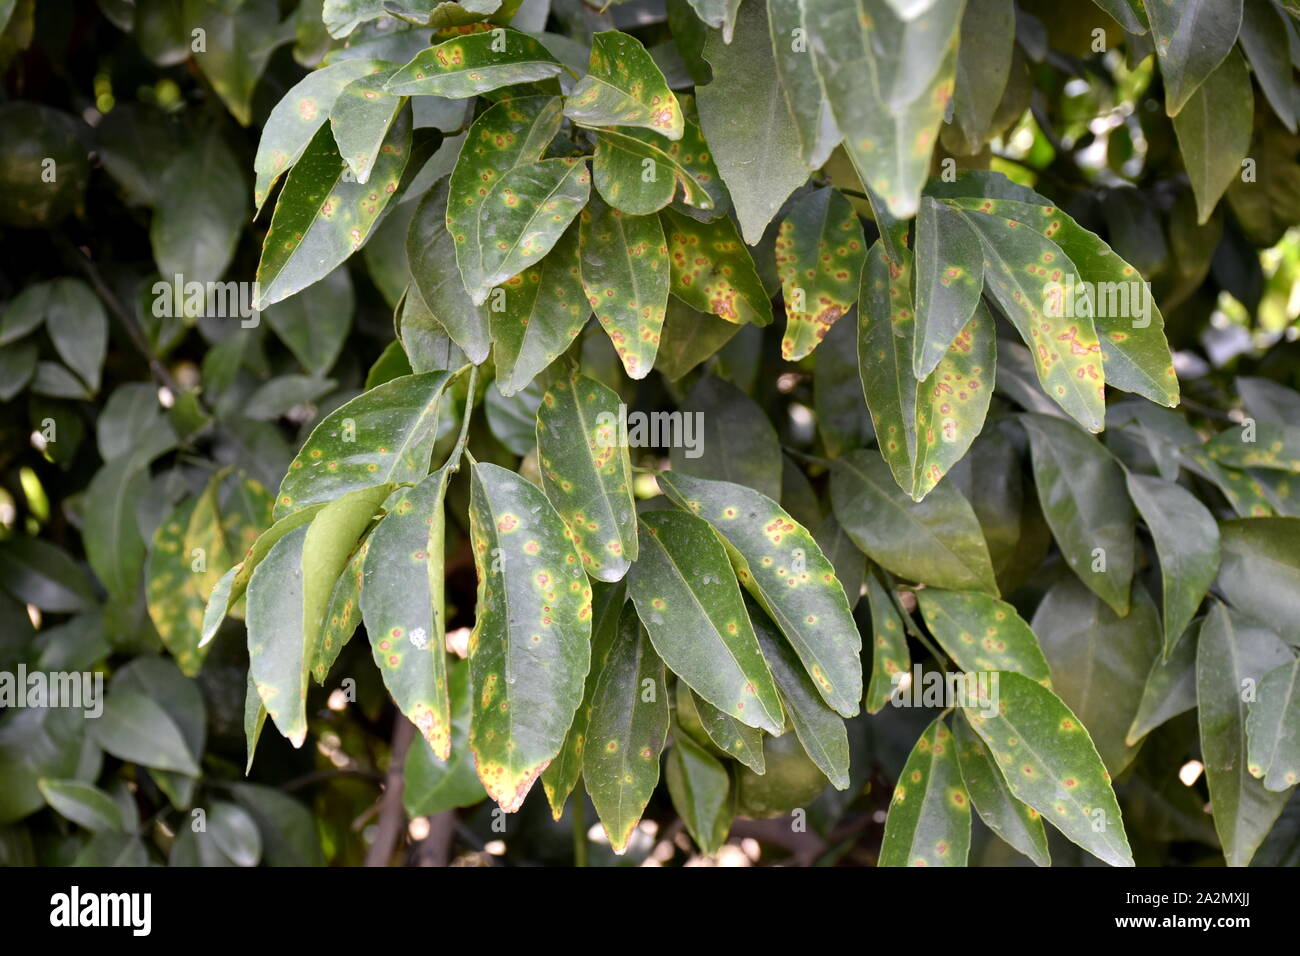 Citrus canker it is a disease affecting Citrus species caused by the bacterium Xanthomonas axonopodis. Stock Photo